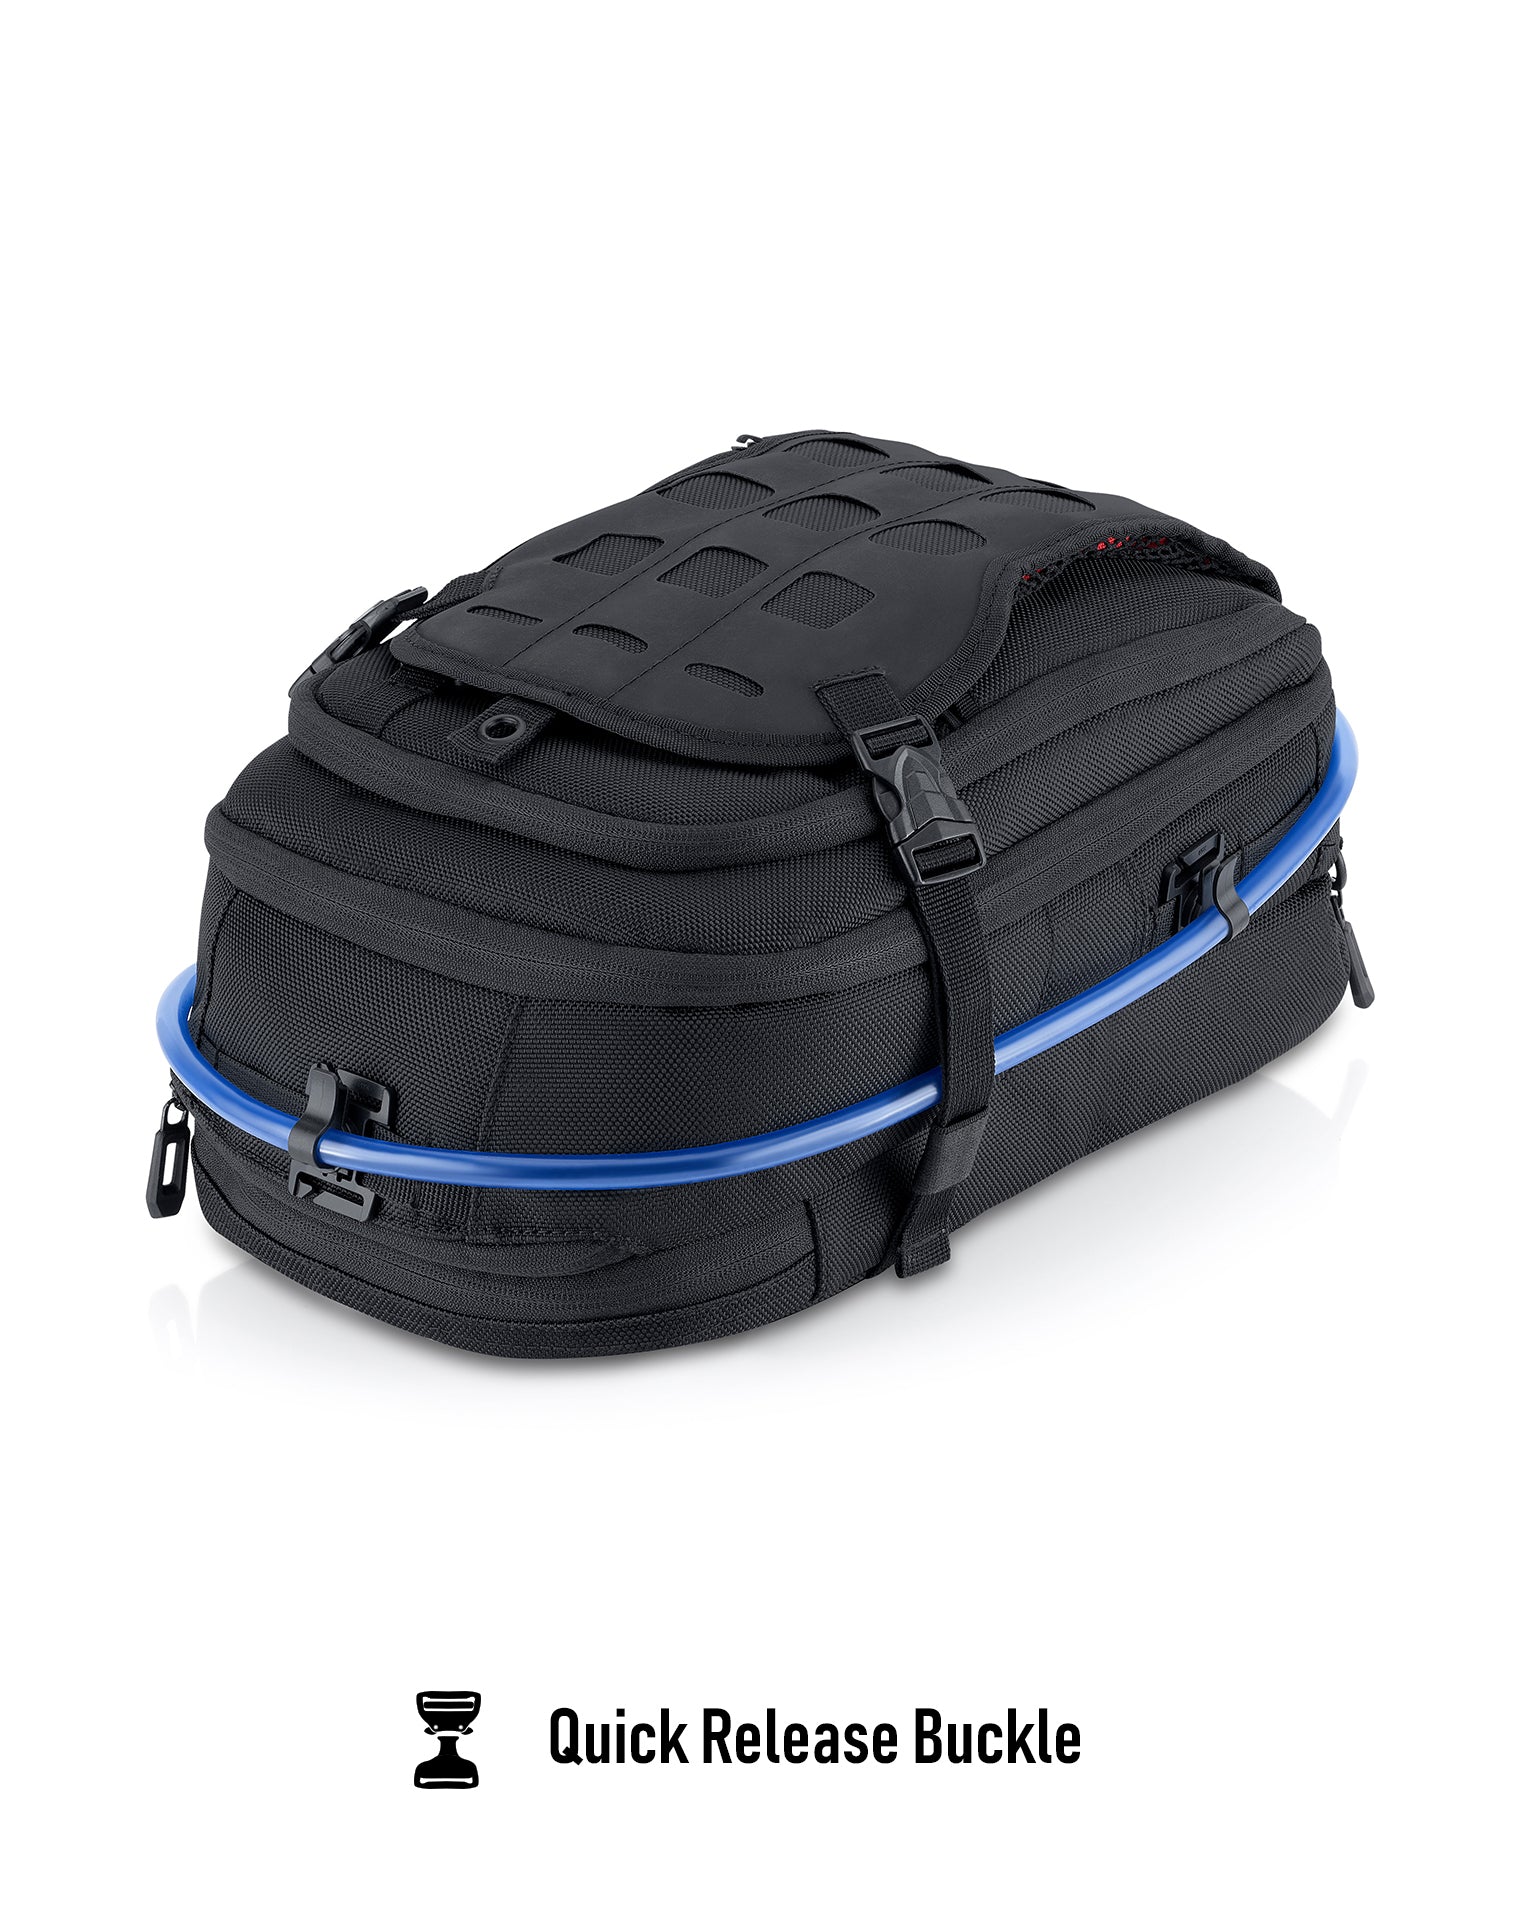 Viking Apex BMW ADV Touring Tank Bag with Hydration Pack